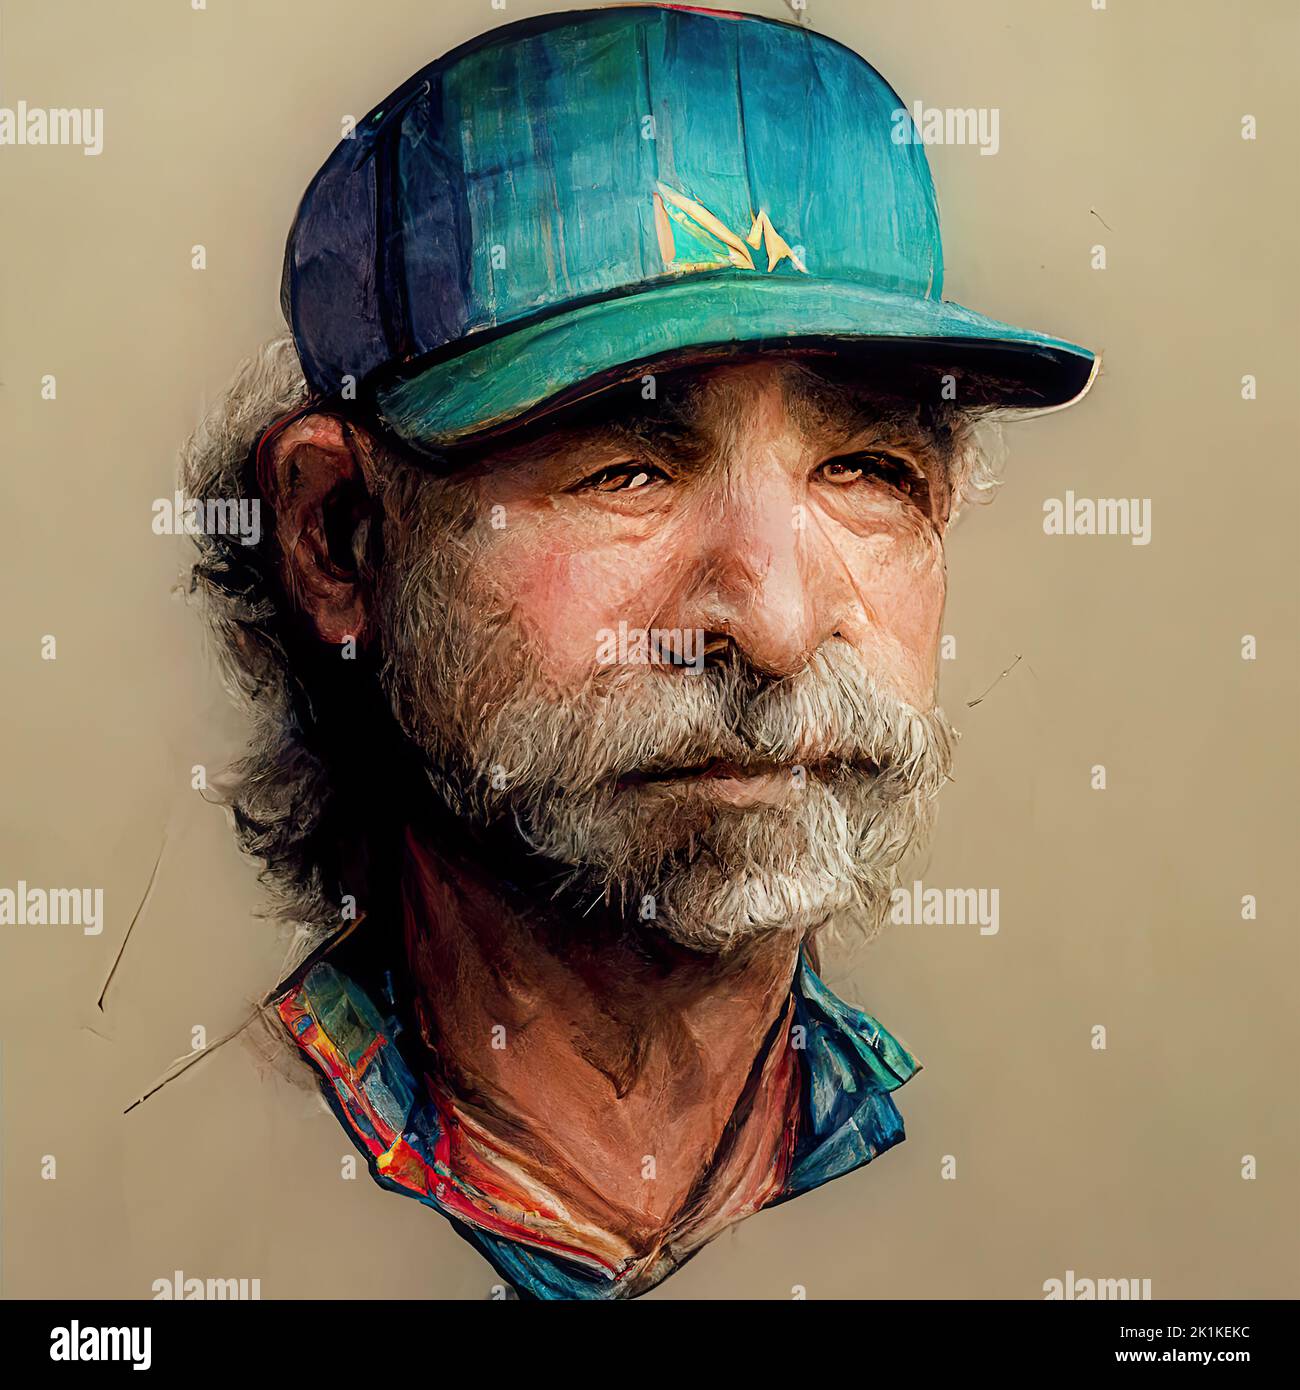 Digitally generated conceptual avatar portrait of a senior Caucasian American man with facial hair and a baseball cap Stock Photo